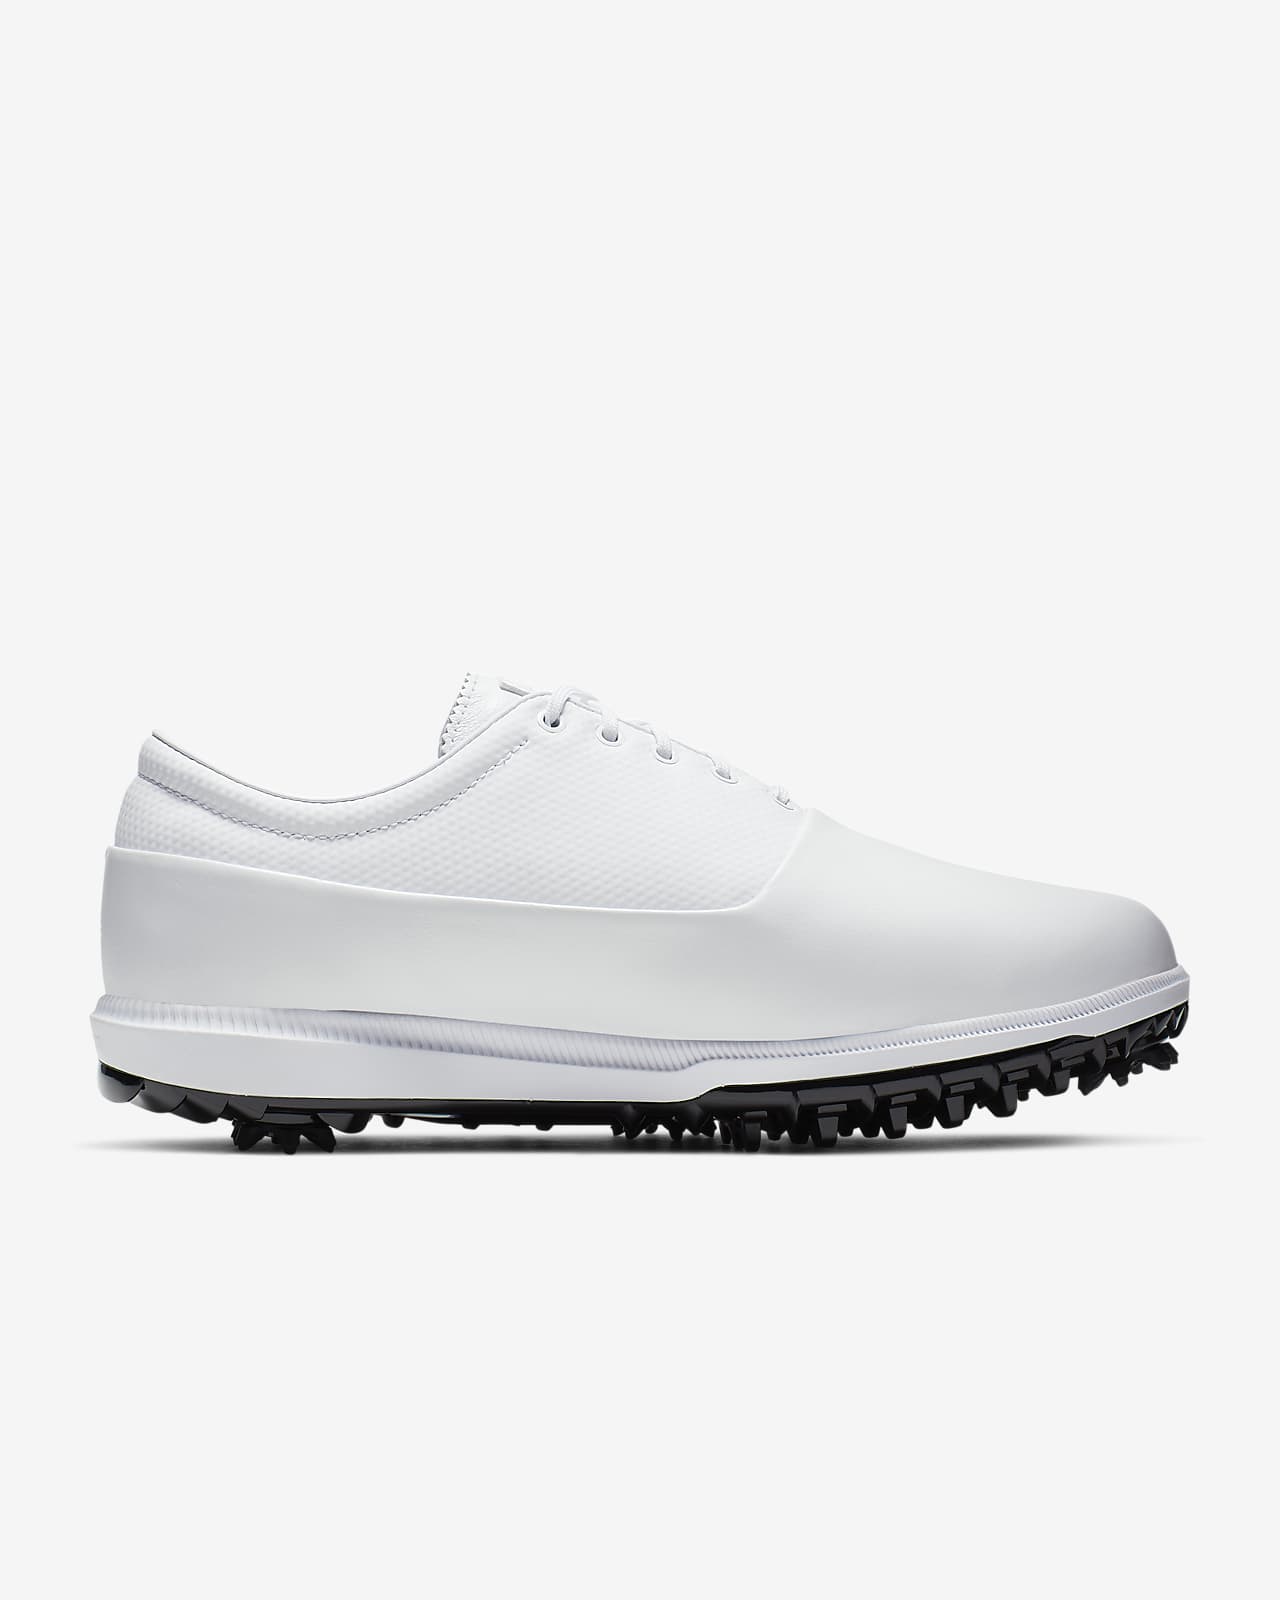 nike women's air zoom victory golf shoes